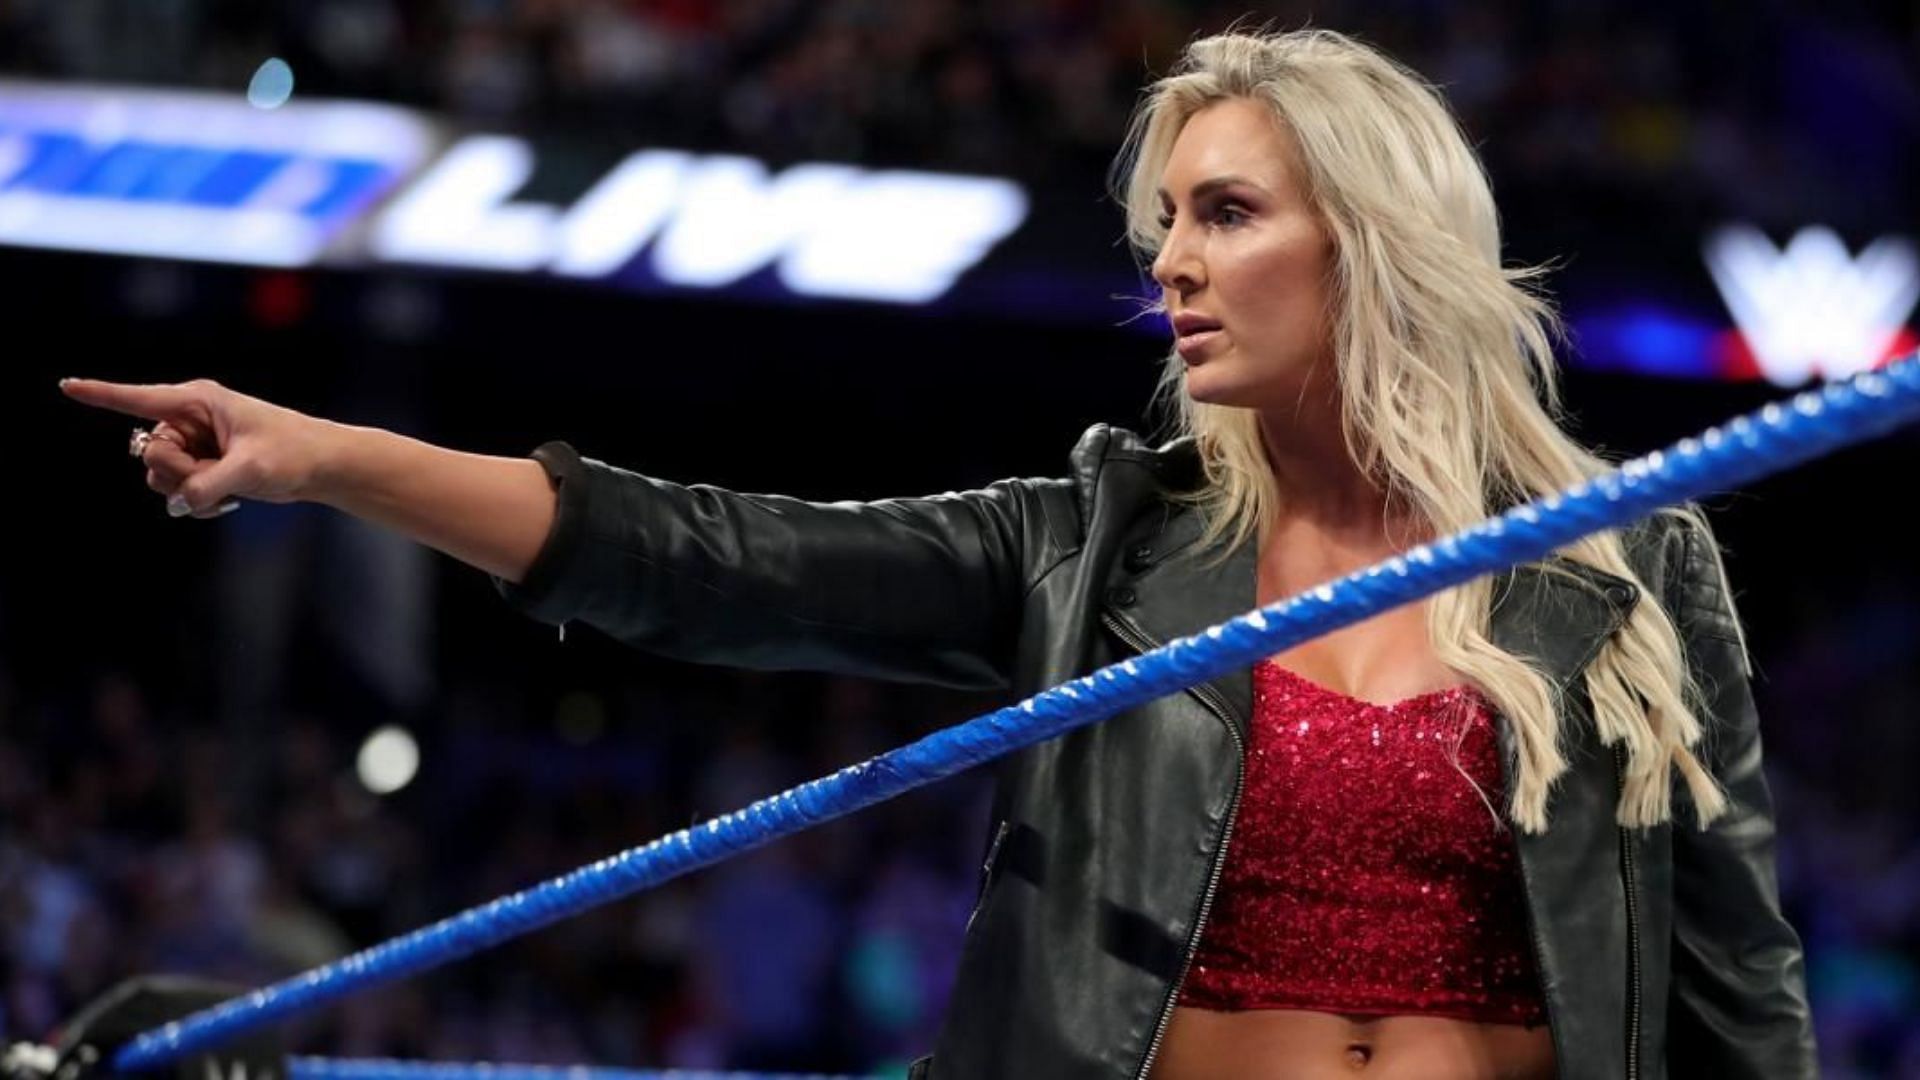 Charlotte Flair returned to WWE SmackDown this past Friday night.